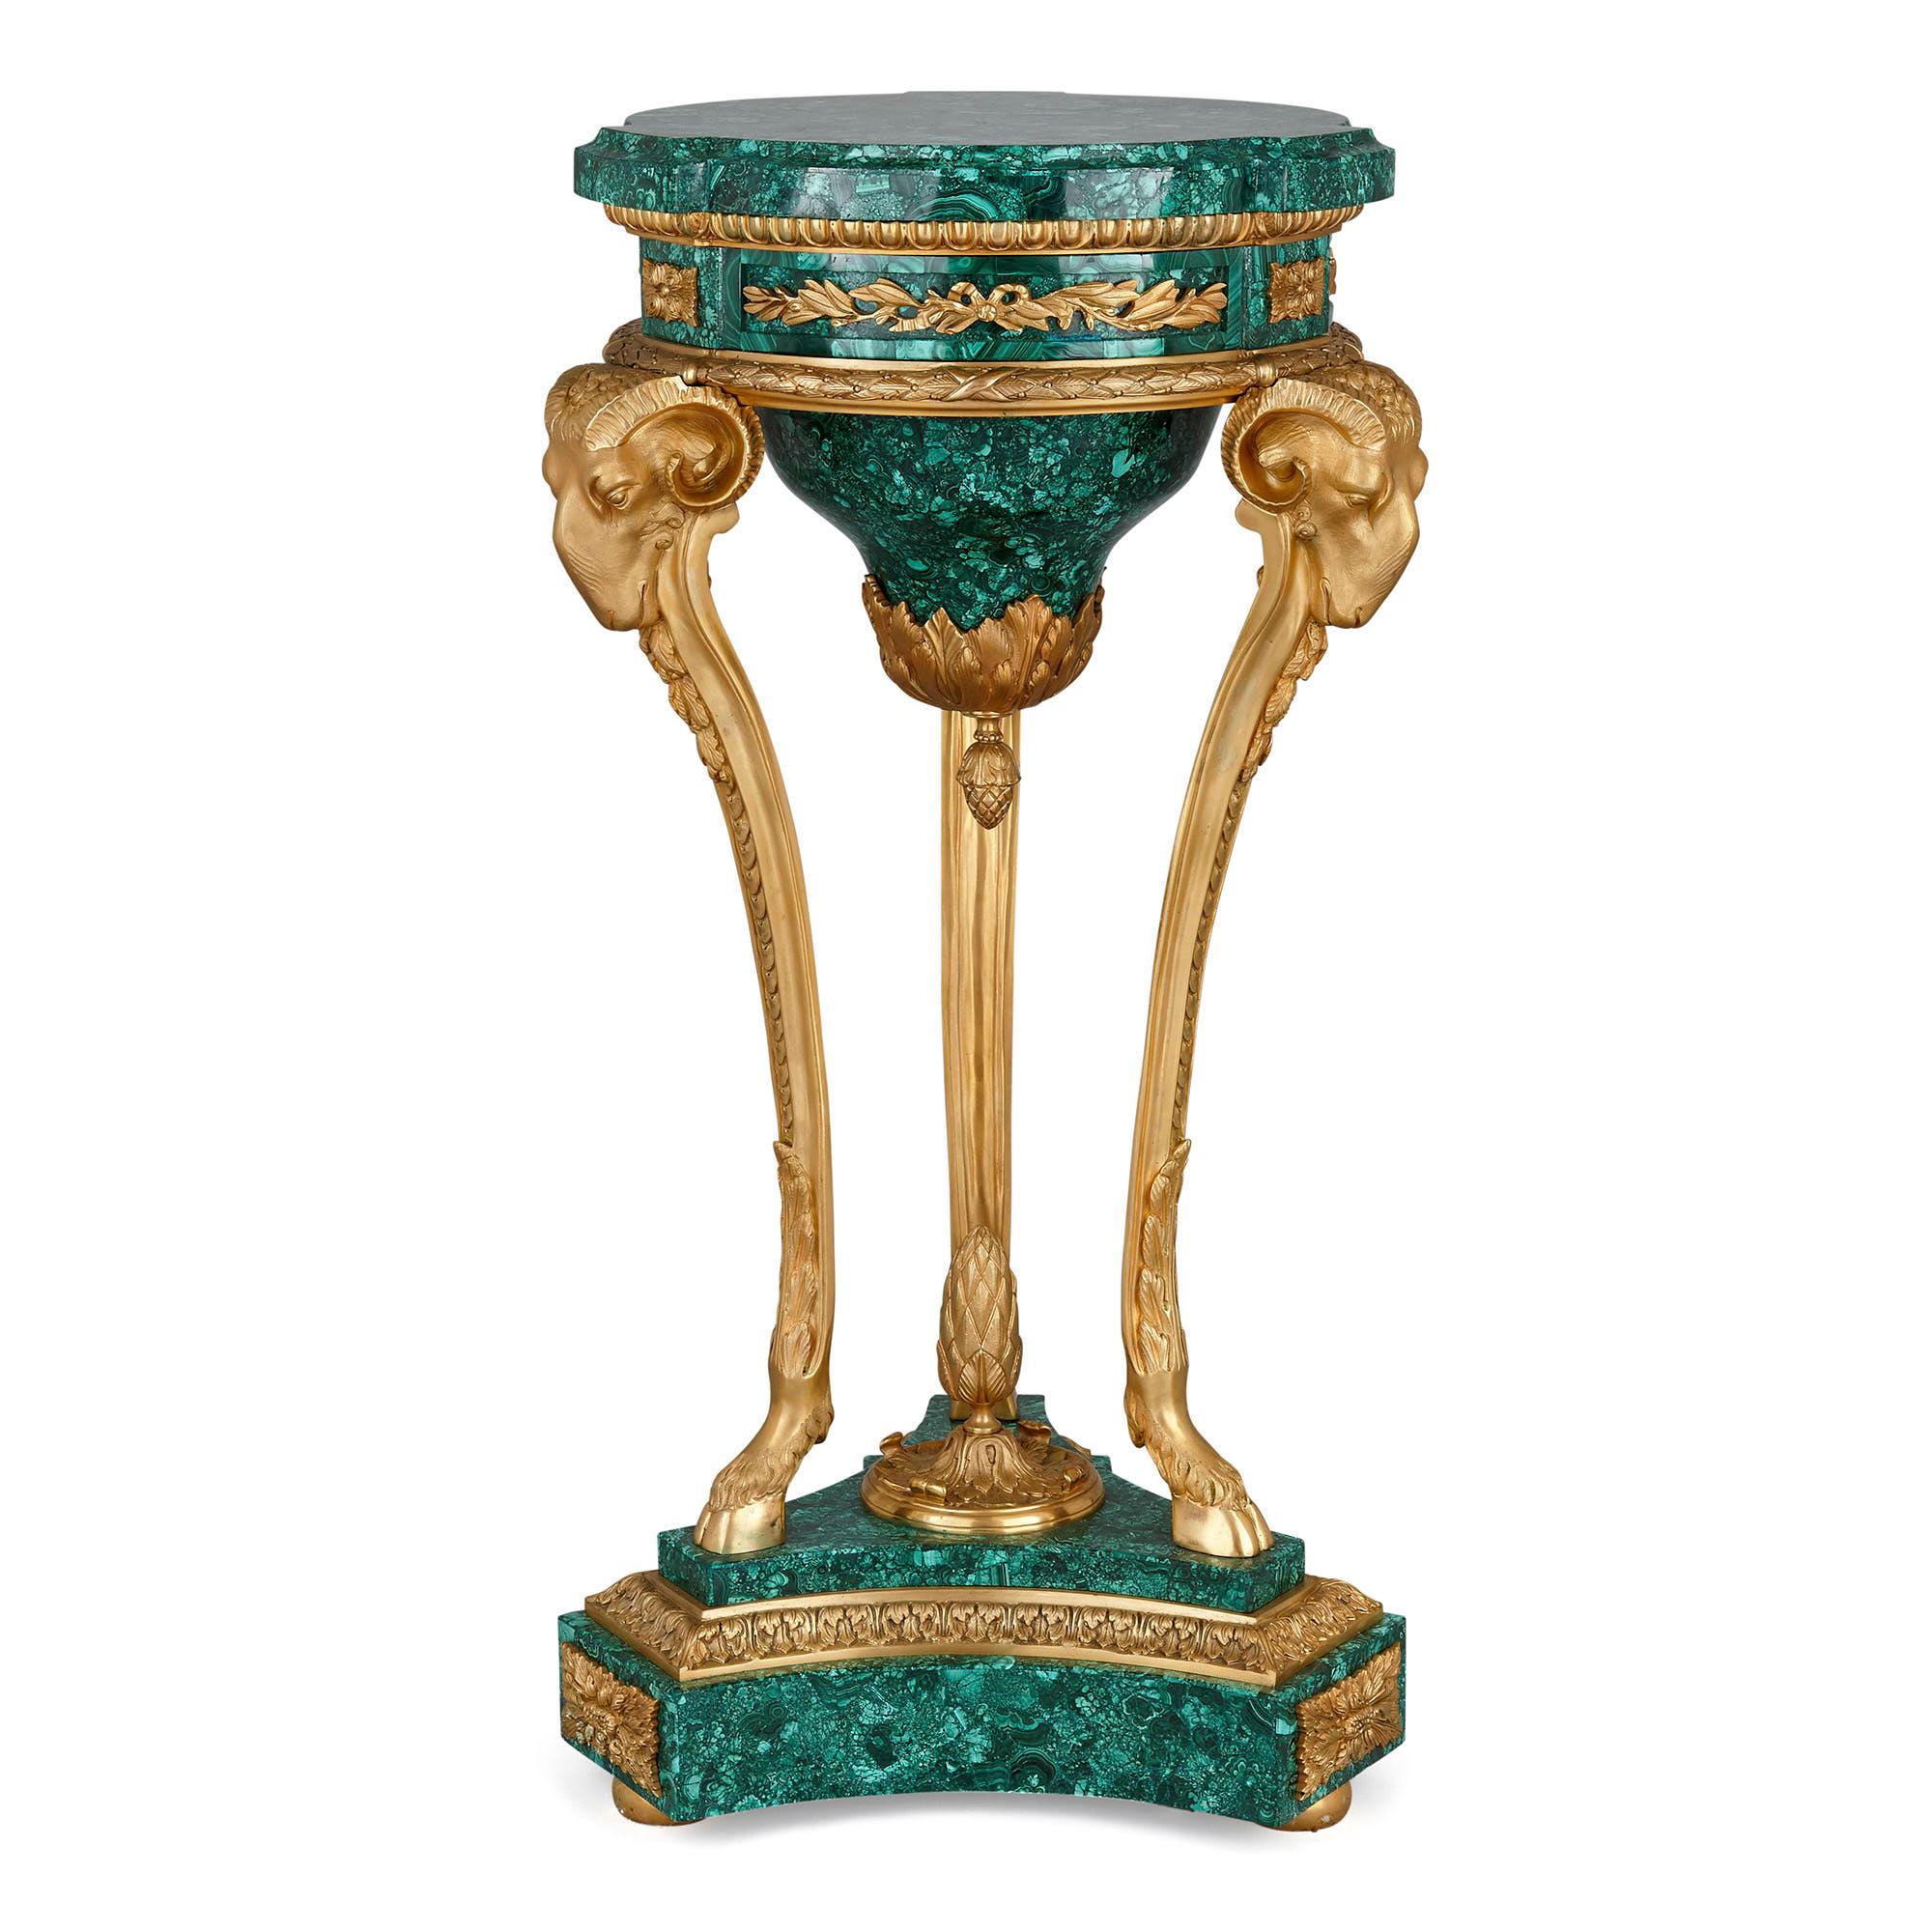 Pair of malachite and gilt bronze stands in the Neoclassical style
French, 20th century
Measures: Height 88cm, width 47cm, depth 39cm

Each pedestal in this pair, wrought from gilt bronze and malachite, is based on the shape of a Classical Greek